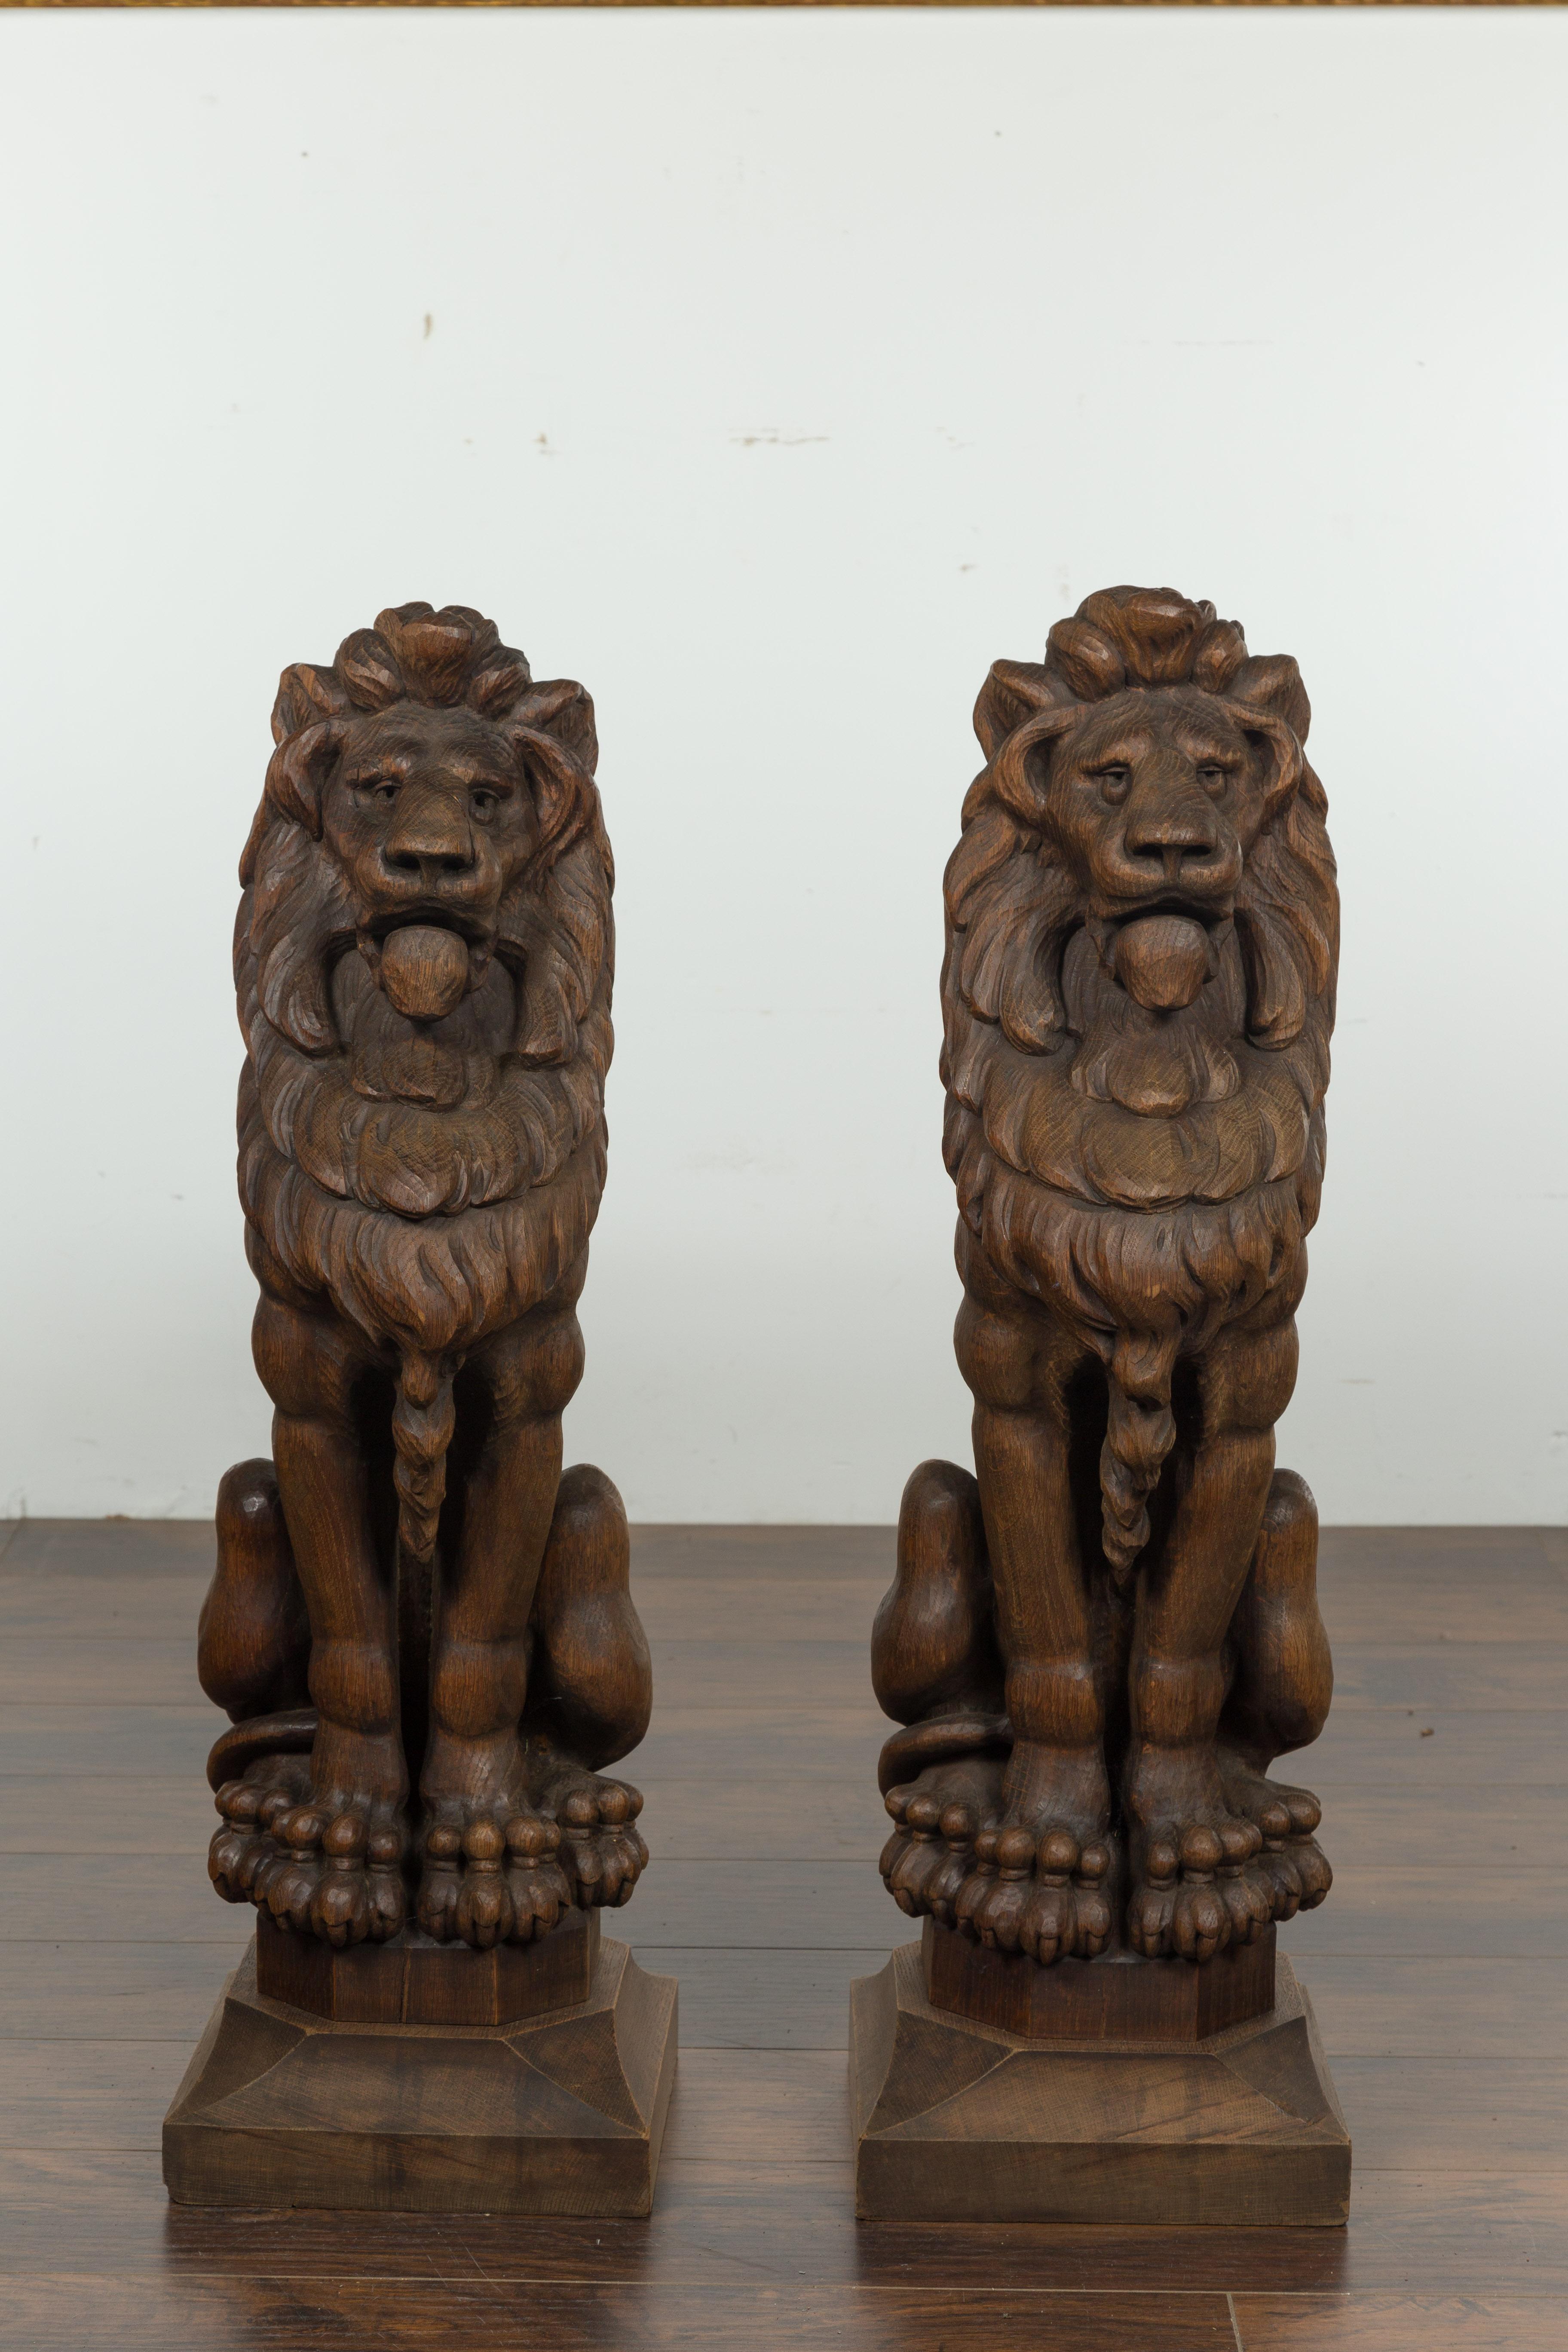 A pair of large English carved oak lions from the late 19th century, with square bases. Created in England during the last quarter of the 19th century, this pair of large English sculptures depict two majesting lions sitting obediently on a square